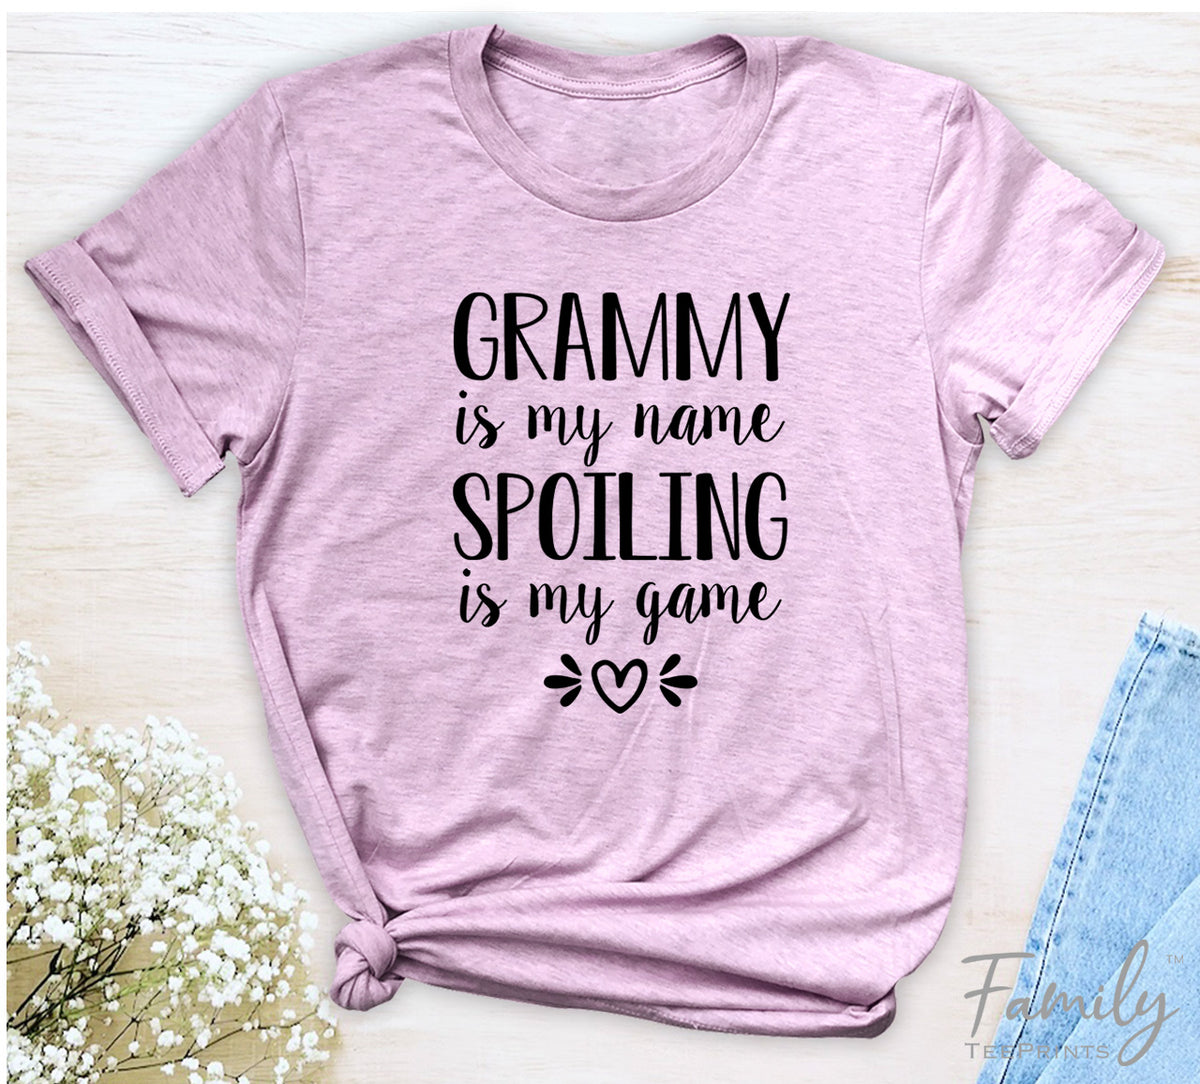 Grammy Is My Name Spoiling Is My Game - Unisex T-shirt - Grammy Shirt - Gift For Grammy - familyteeprints